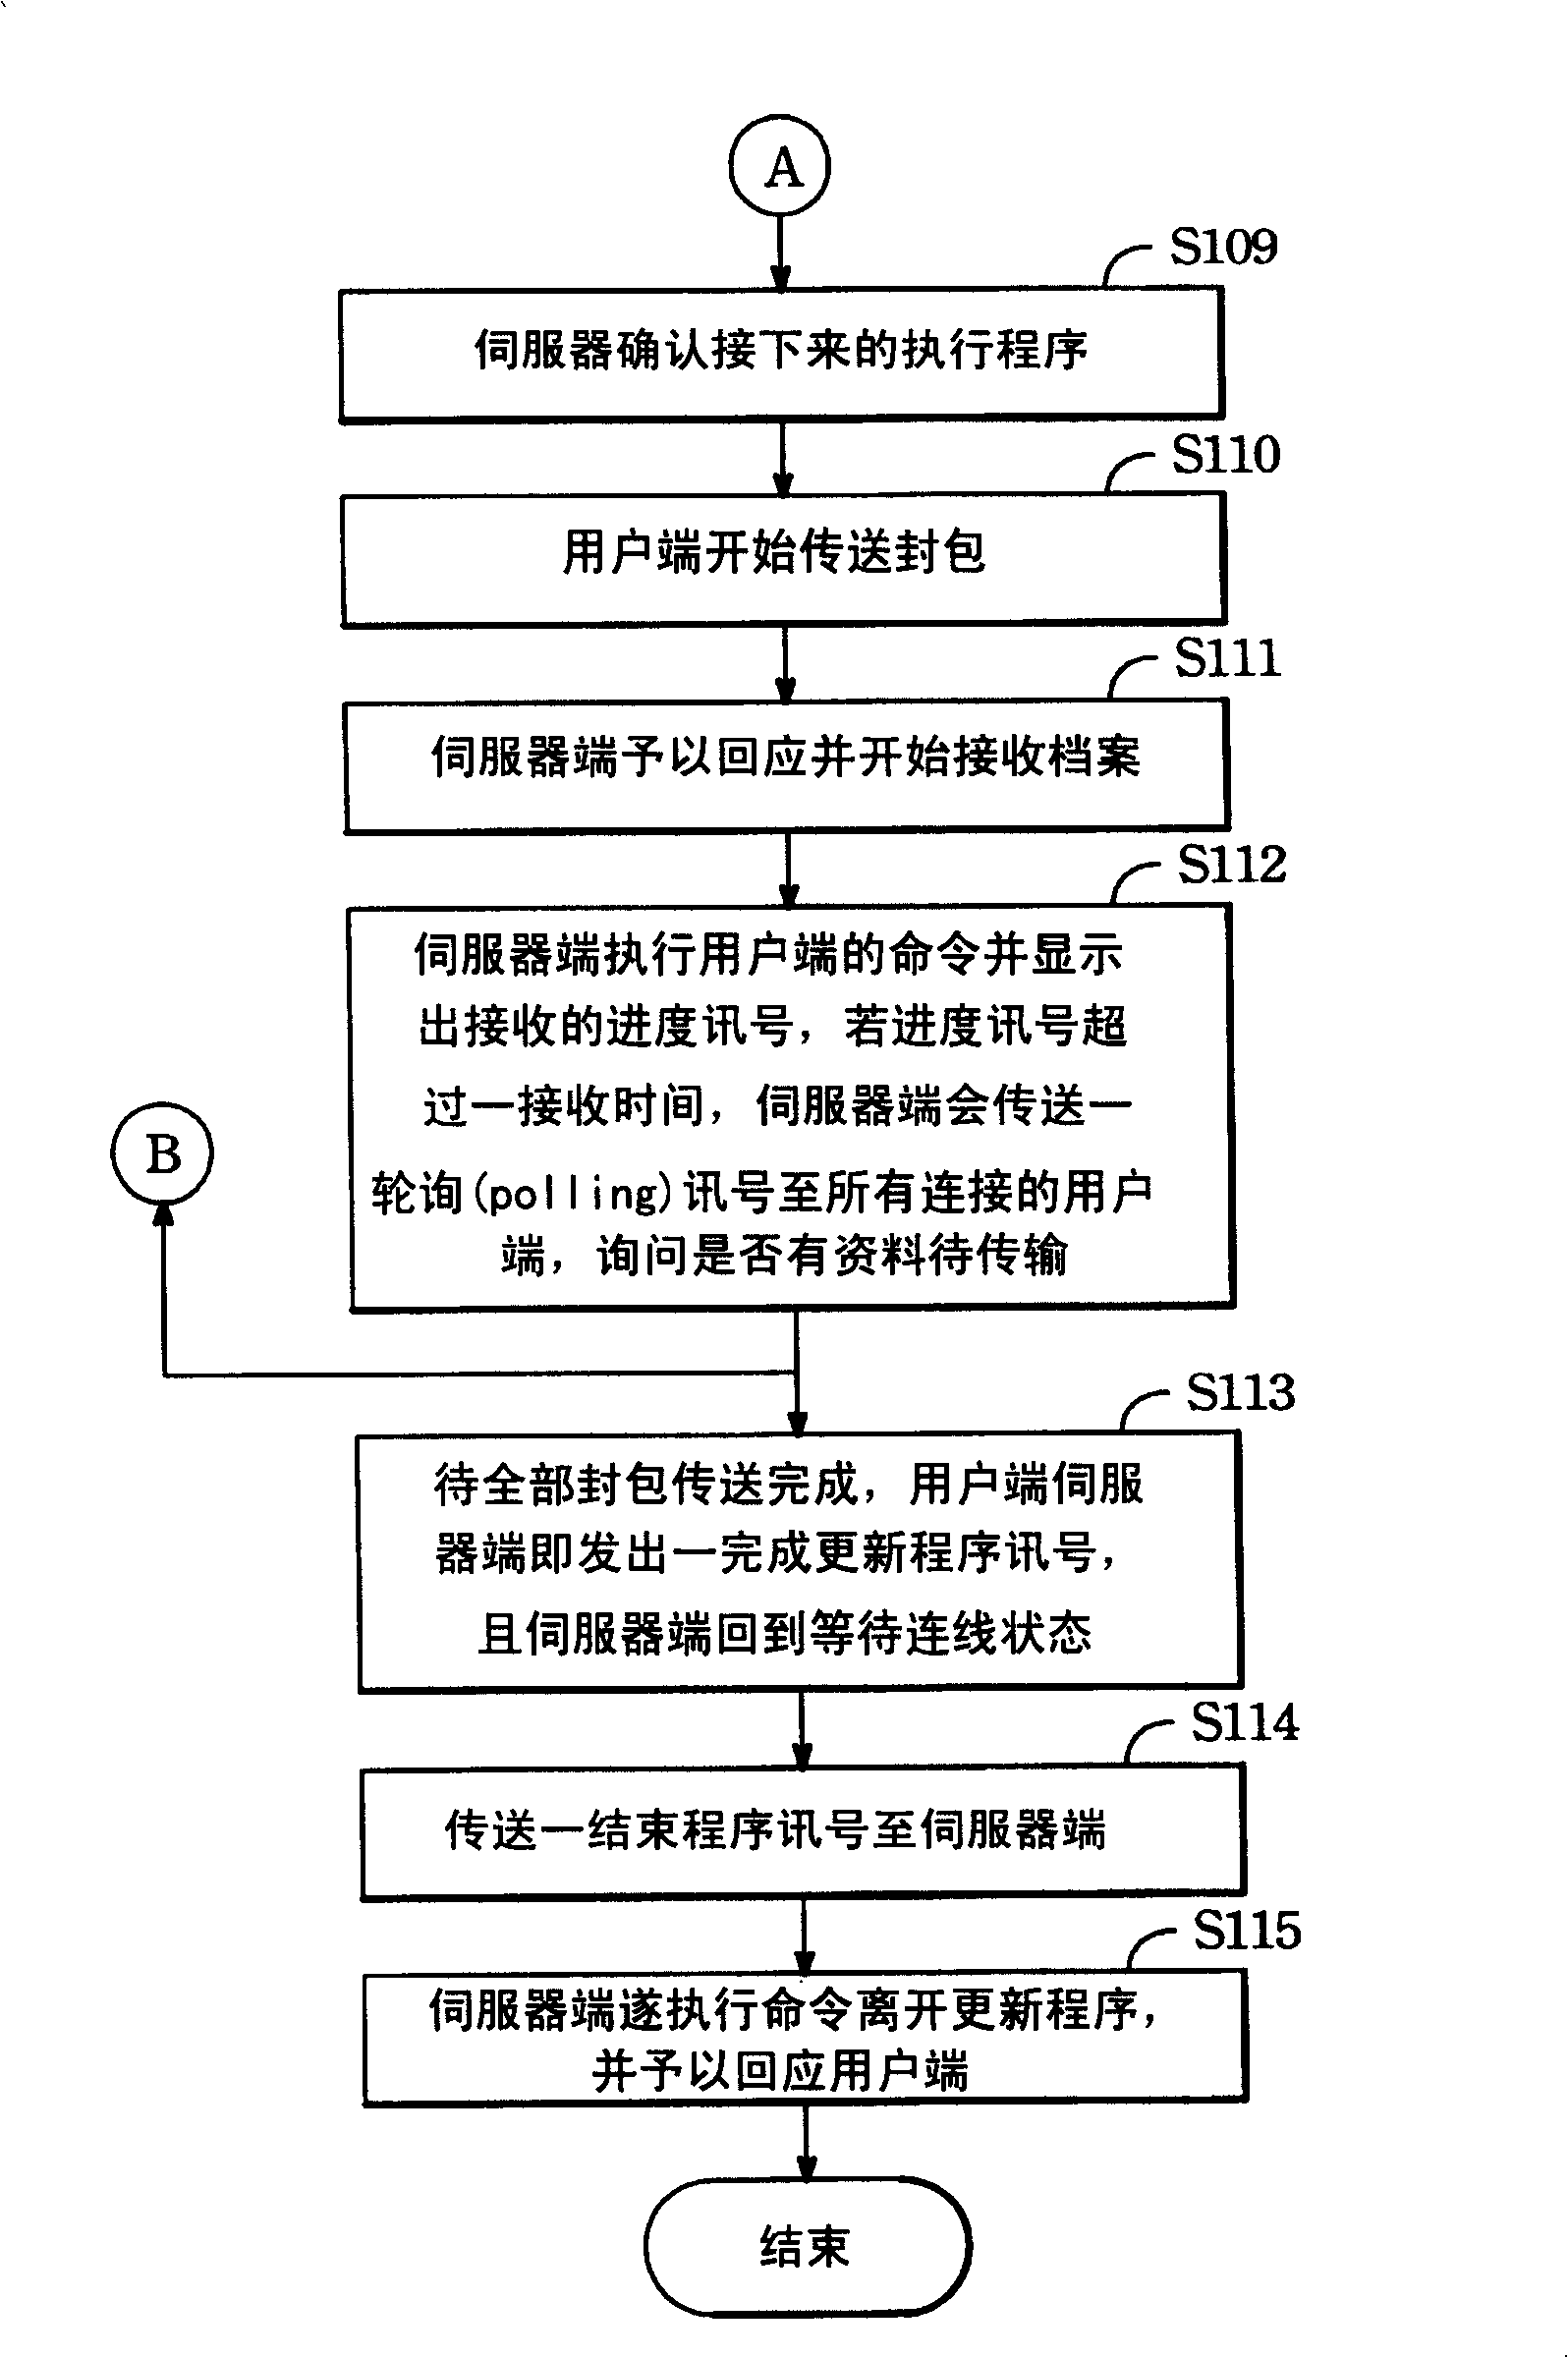 A method for confirming encapsulated packet transmission